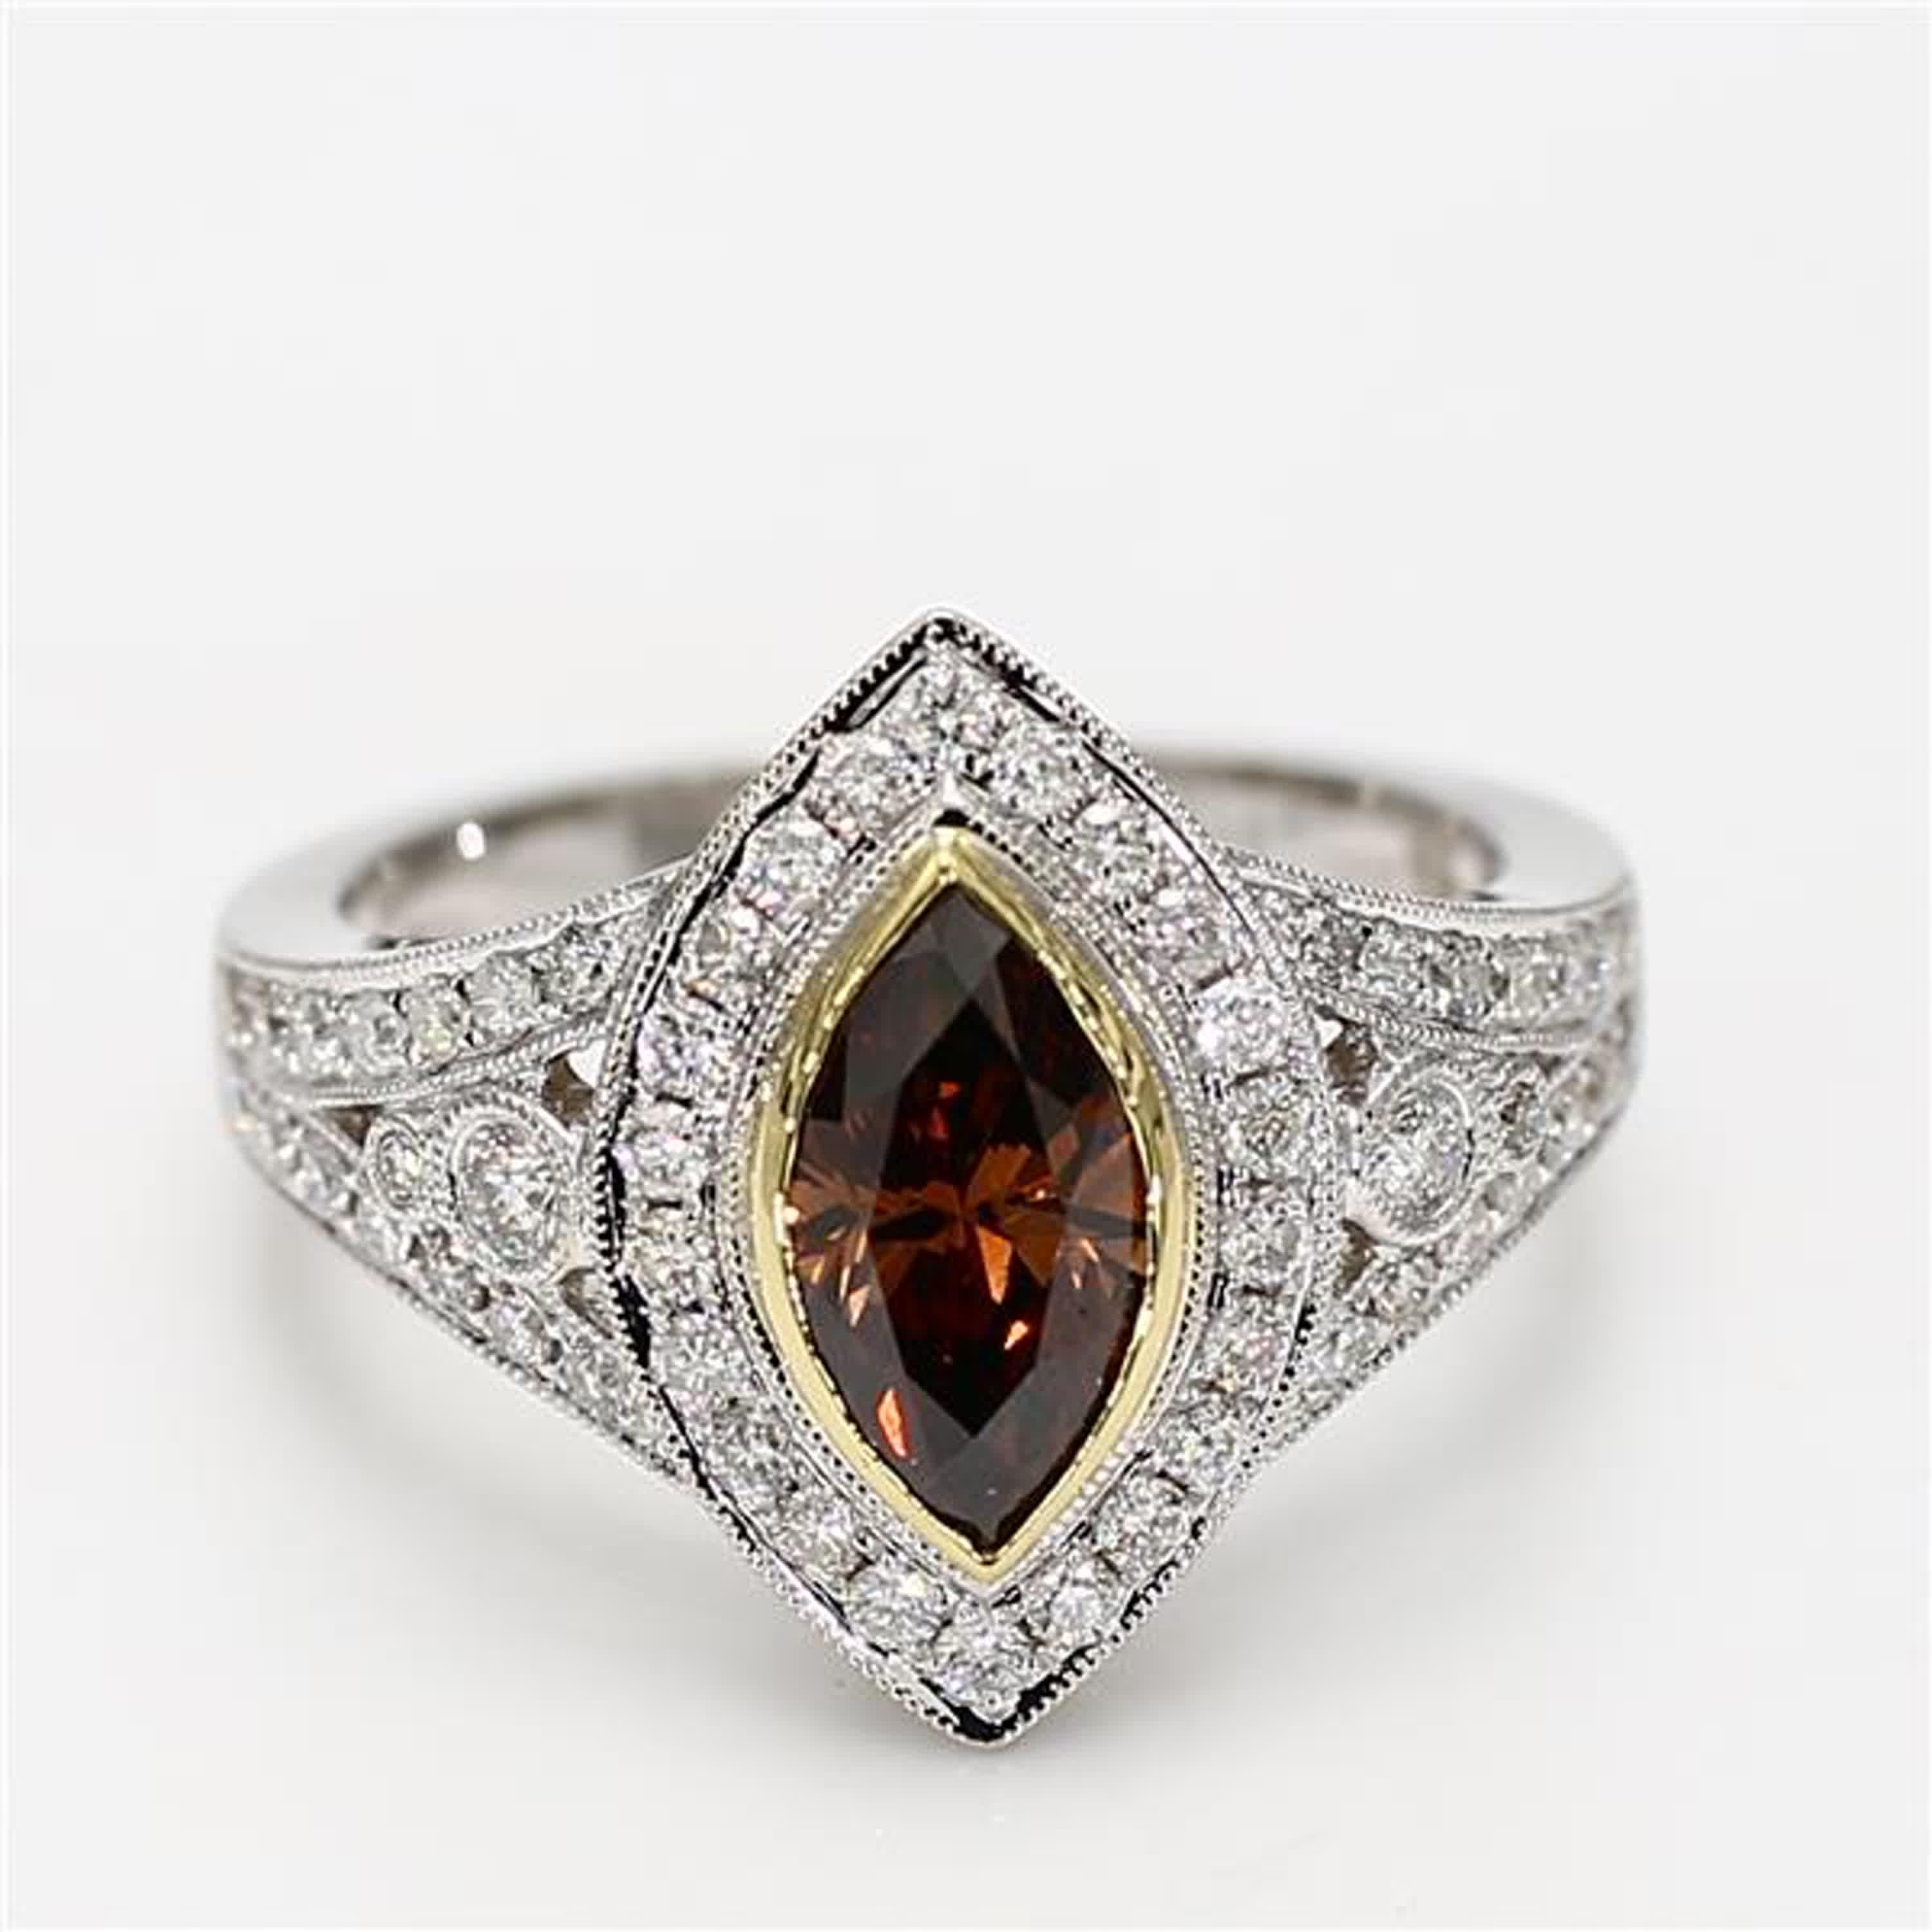 RareGemWorld's classic GIA certified diamond ring. Mounted in a beautiful 18K Yellow and White Gold setting with a natural marquise cut brown diamond. The brown diamond is surrounded by round natural white diamond melee. This ring is guaranteed to